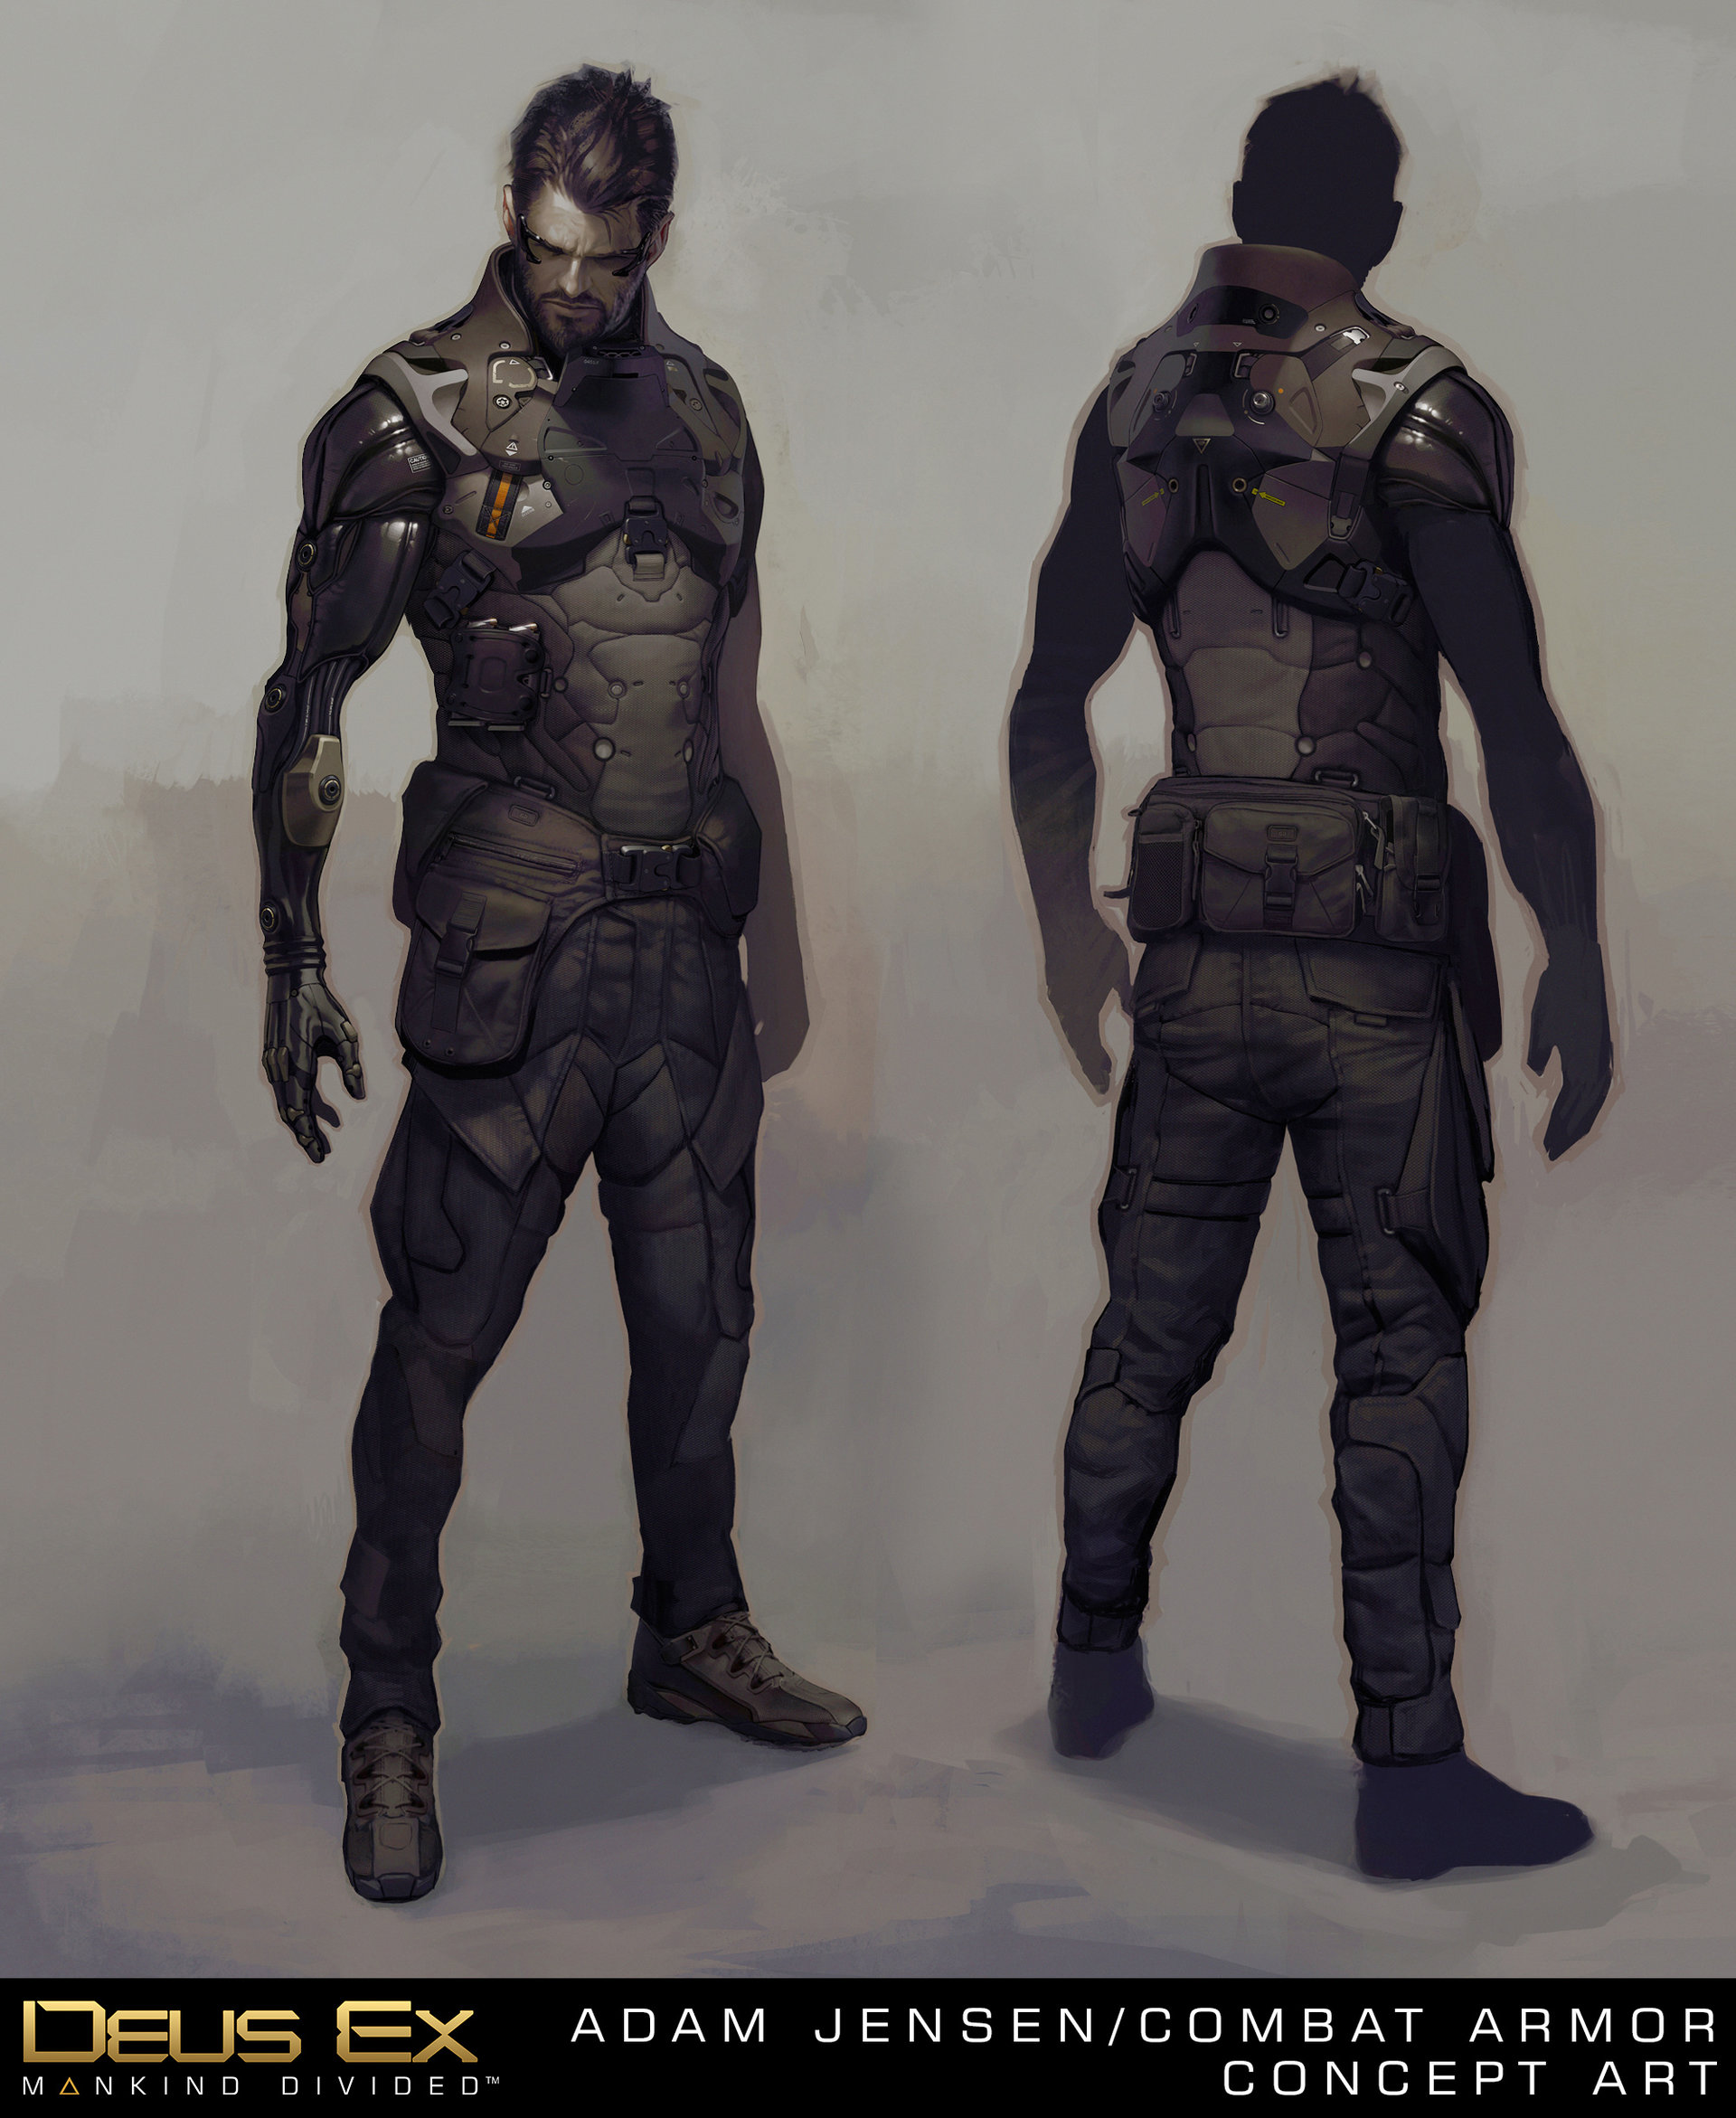 Sweet Art From The New Deus Ex Game